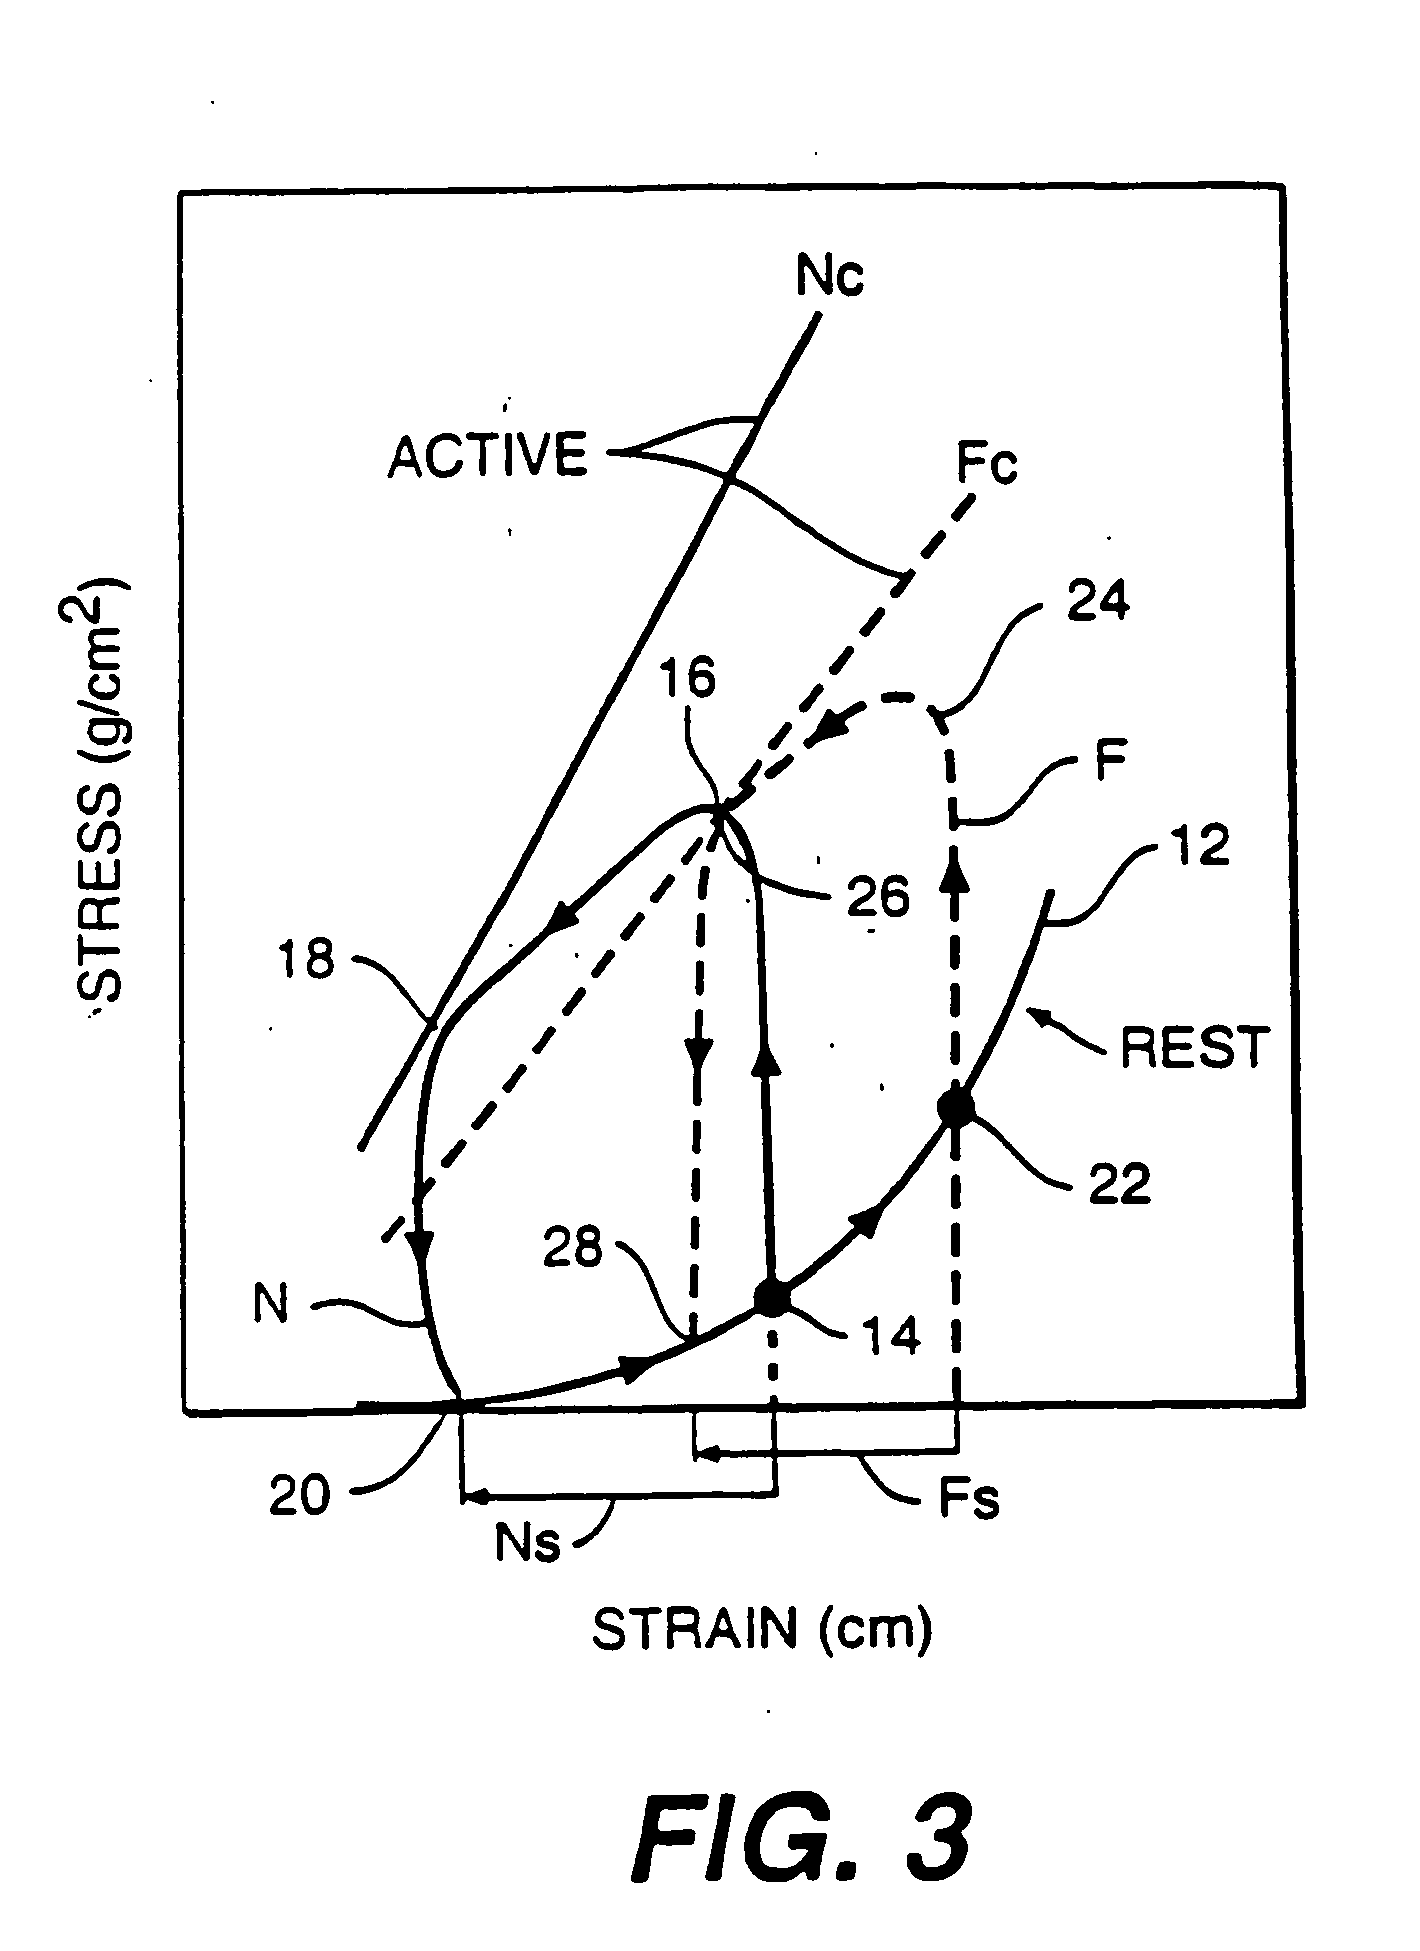 Stress reduction apparatus and method